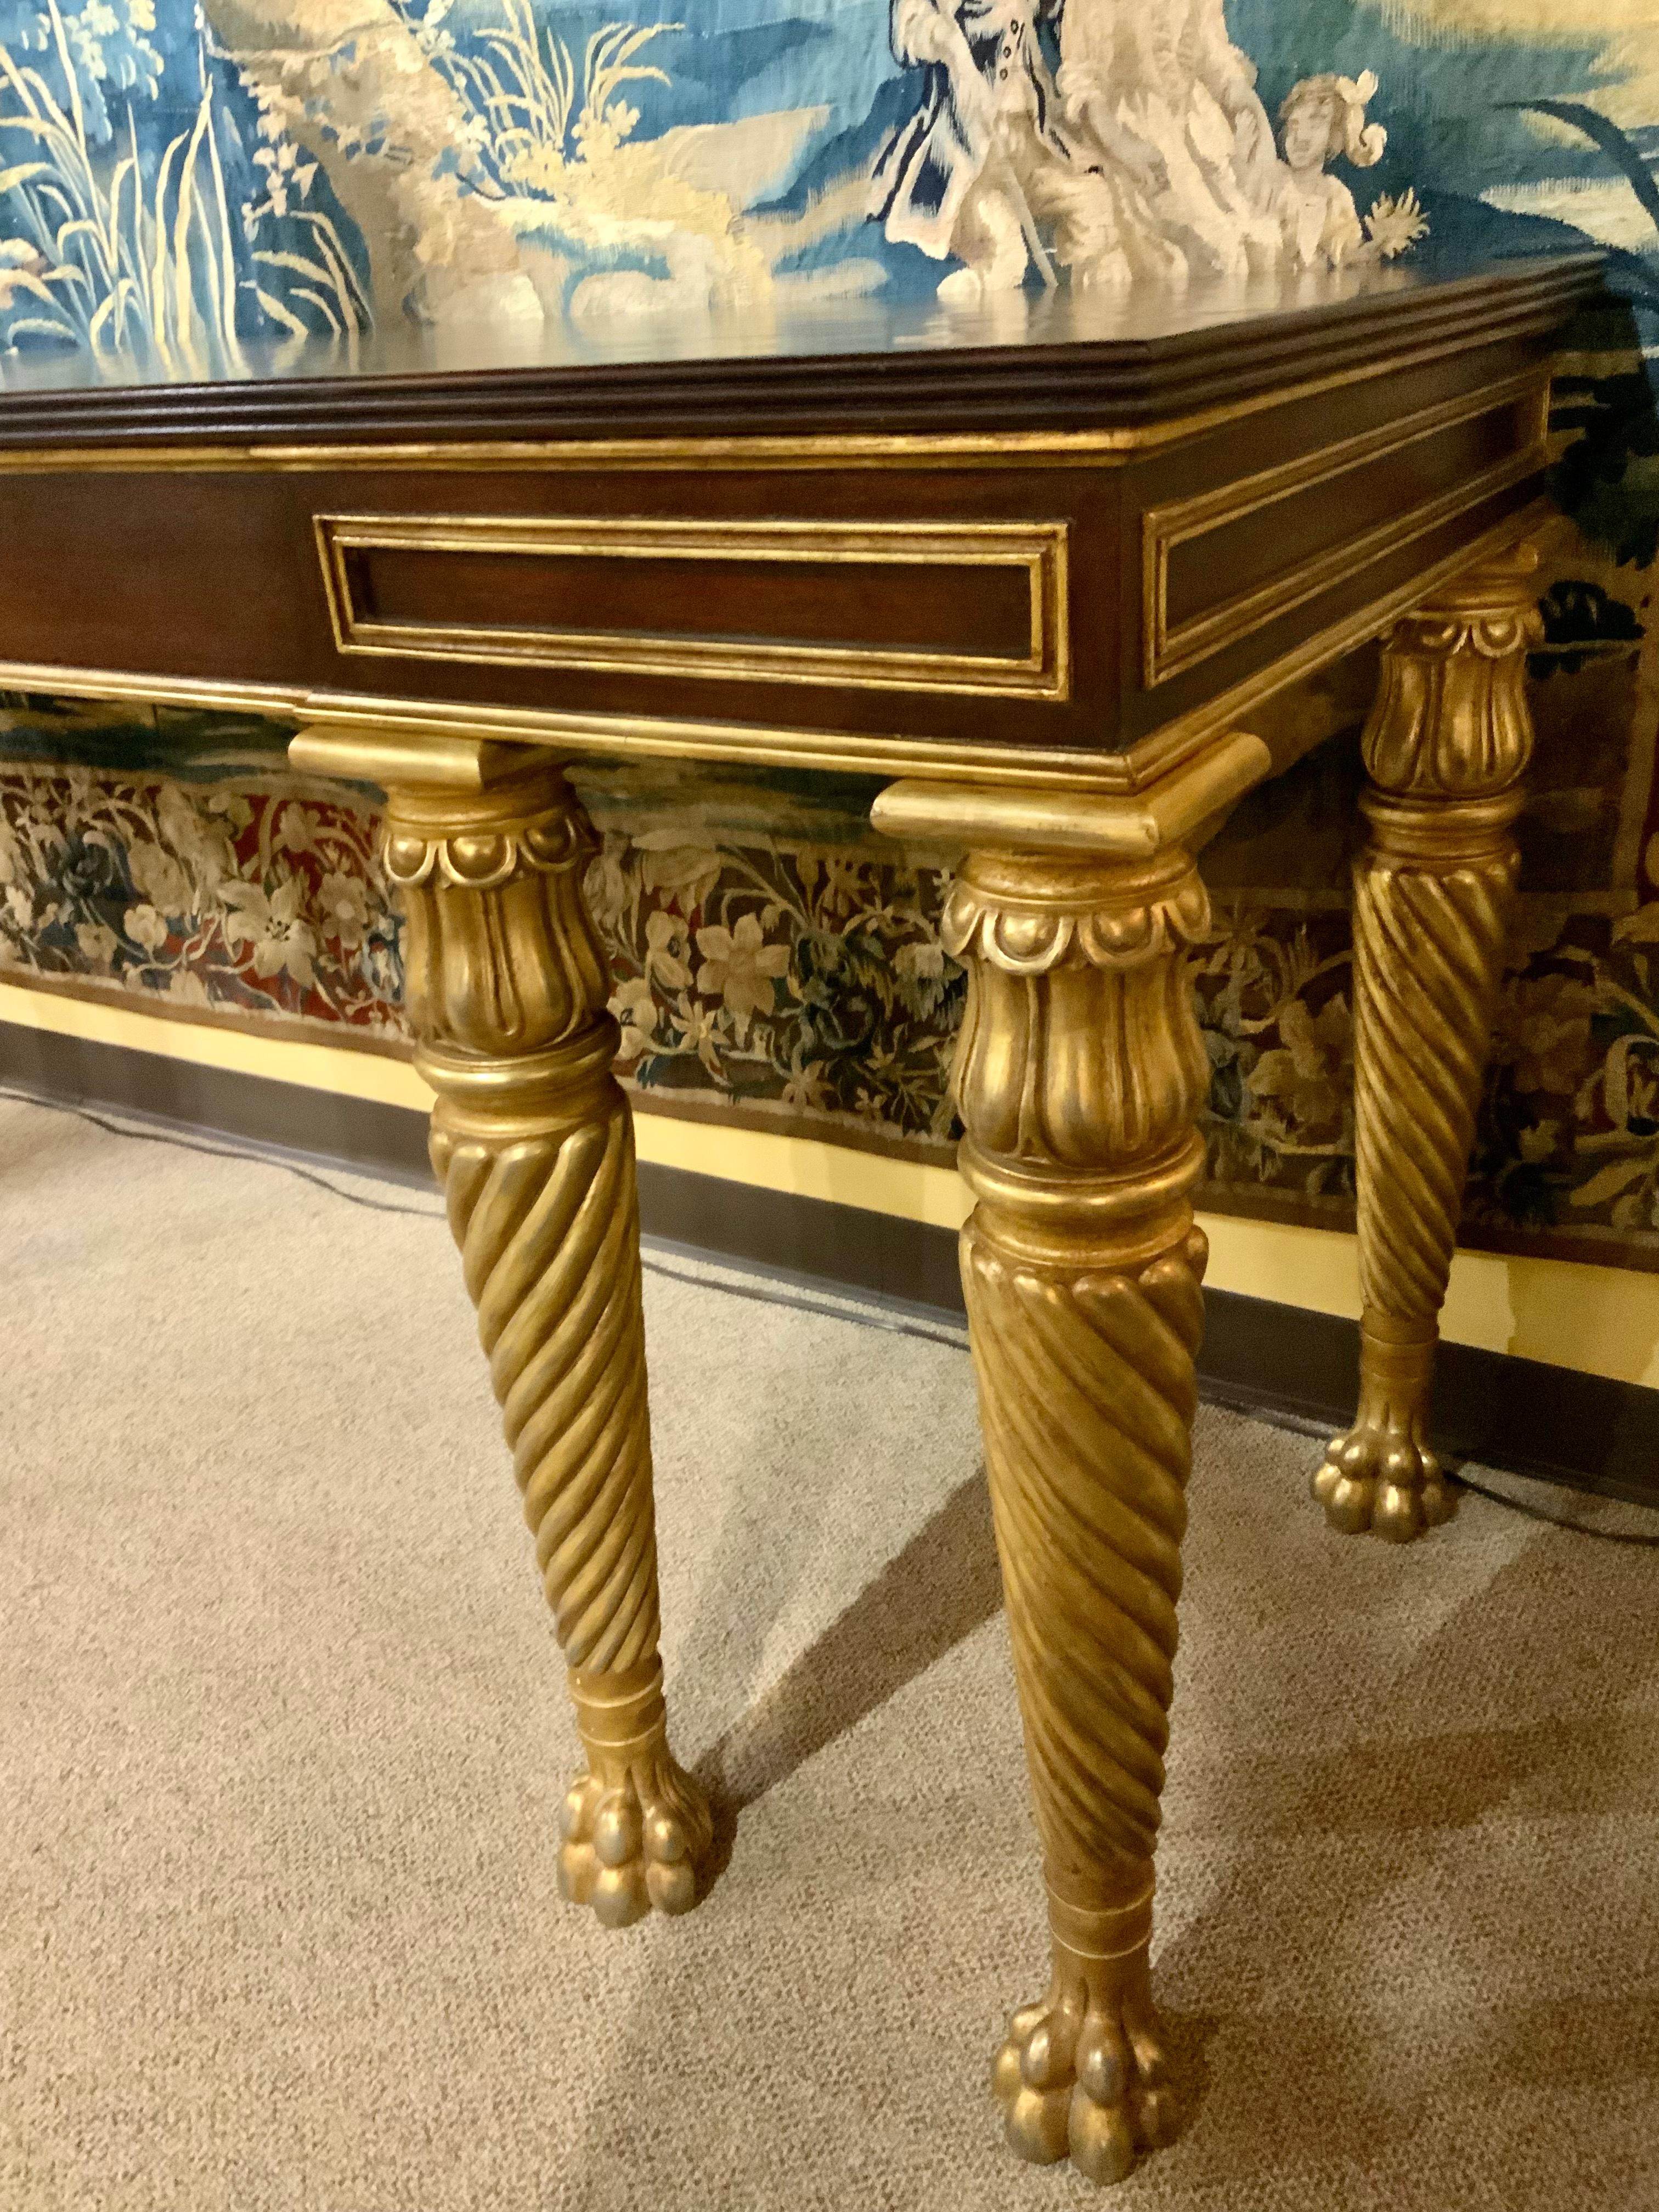 Mahogany Console with Gilt Carved Legs and Designs in Neoclassical Taste In Excellent Condition For Sale In Houston, TX